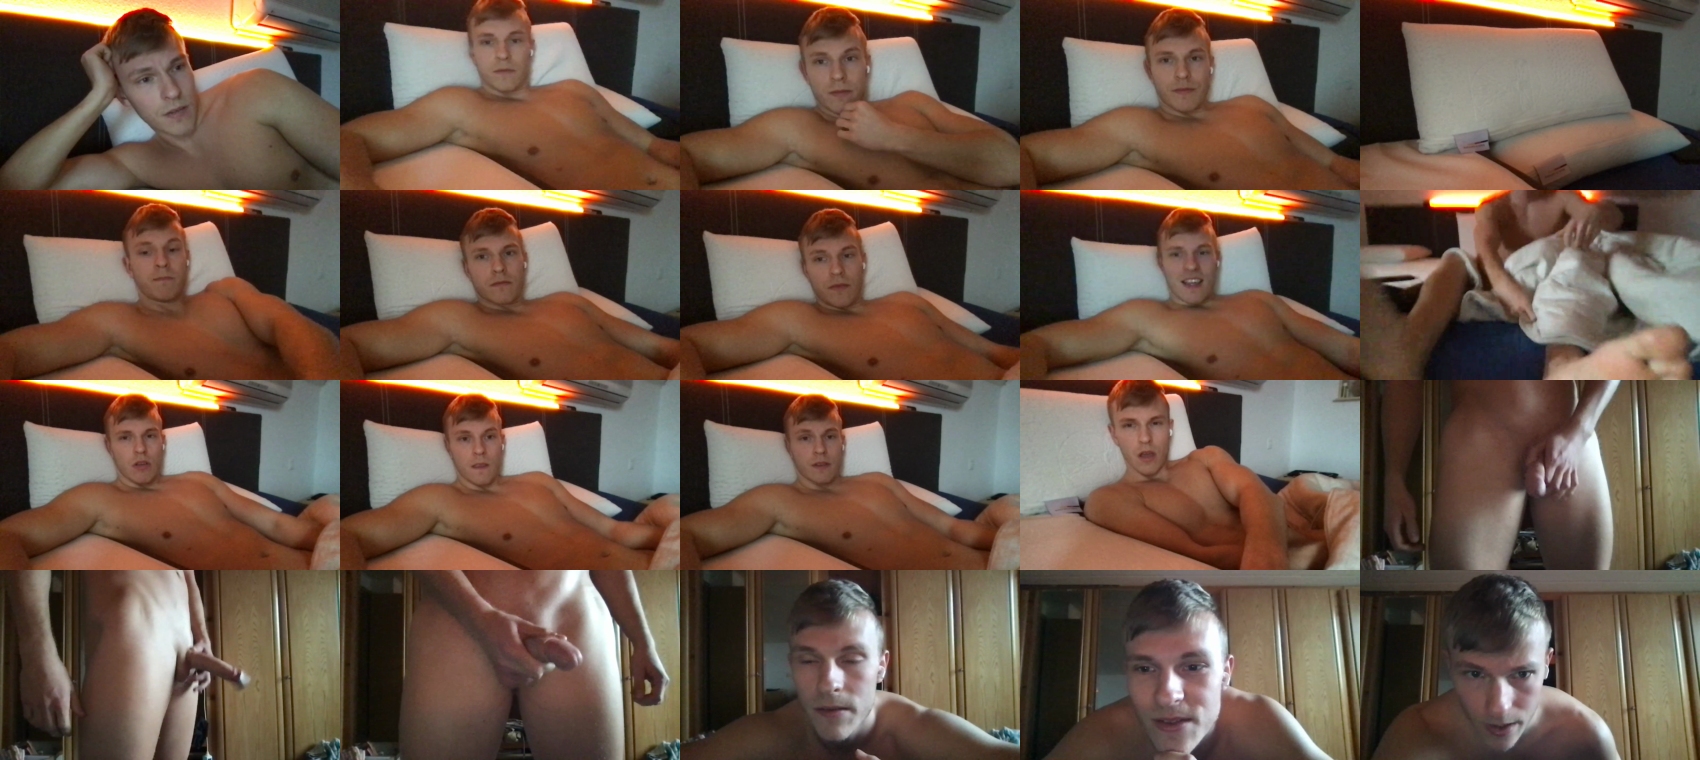 Nick_Dick97  16-04-2023 Recorded Video natural